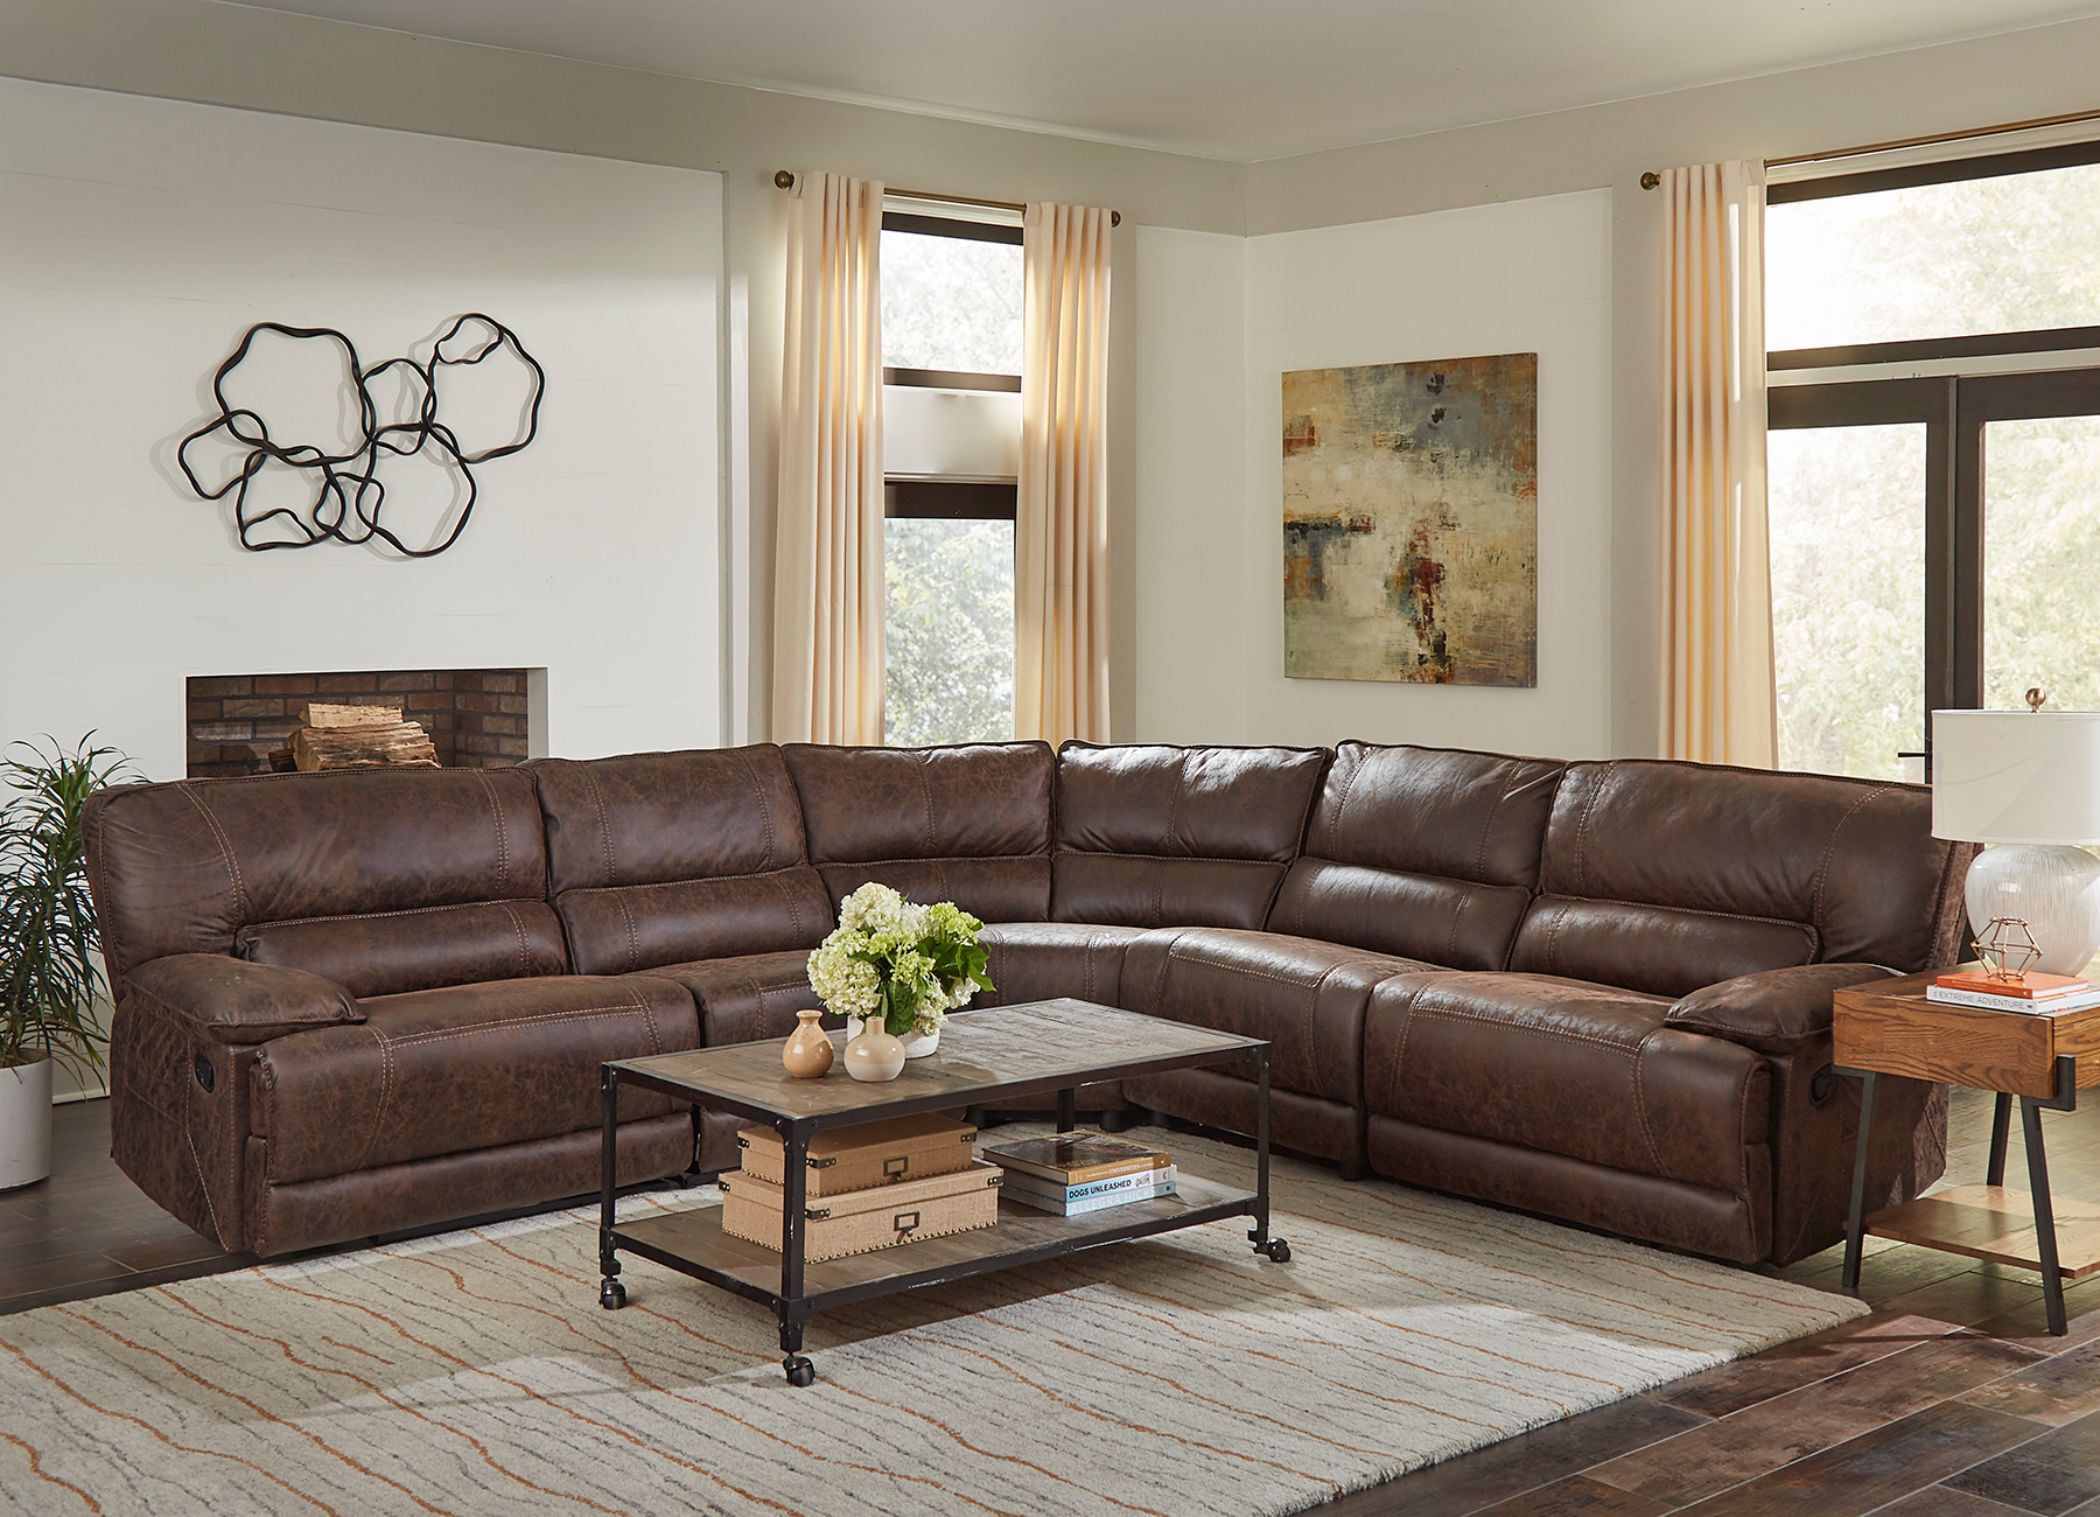 Malyn Weathered Brown Faux Leather Reclining Sectional Sofa With In Faux Leather Sectional Sofa Sets (Gallery 6 of 21)